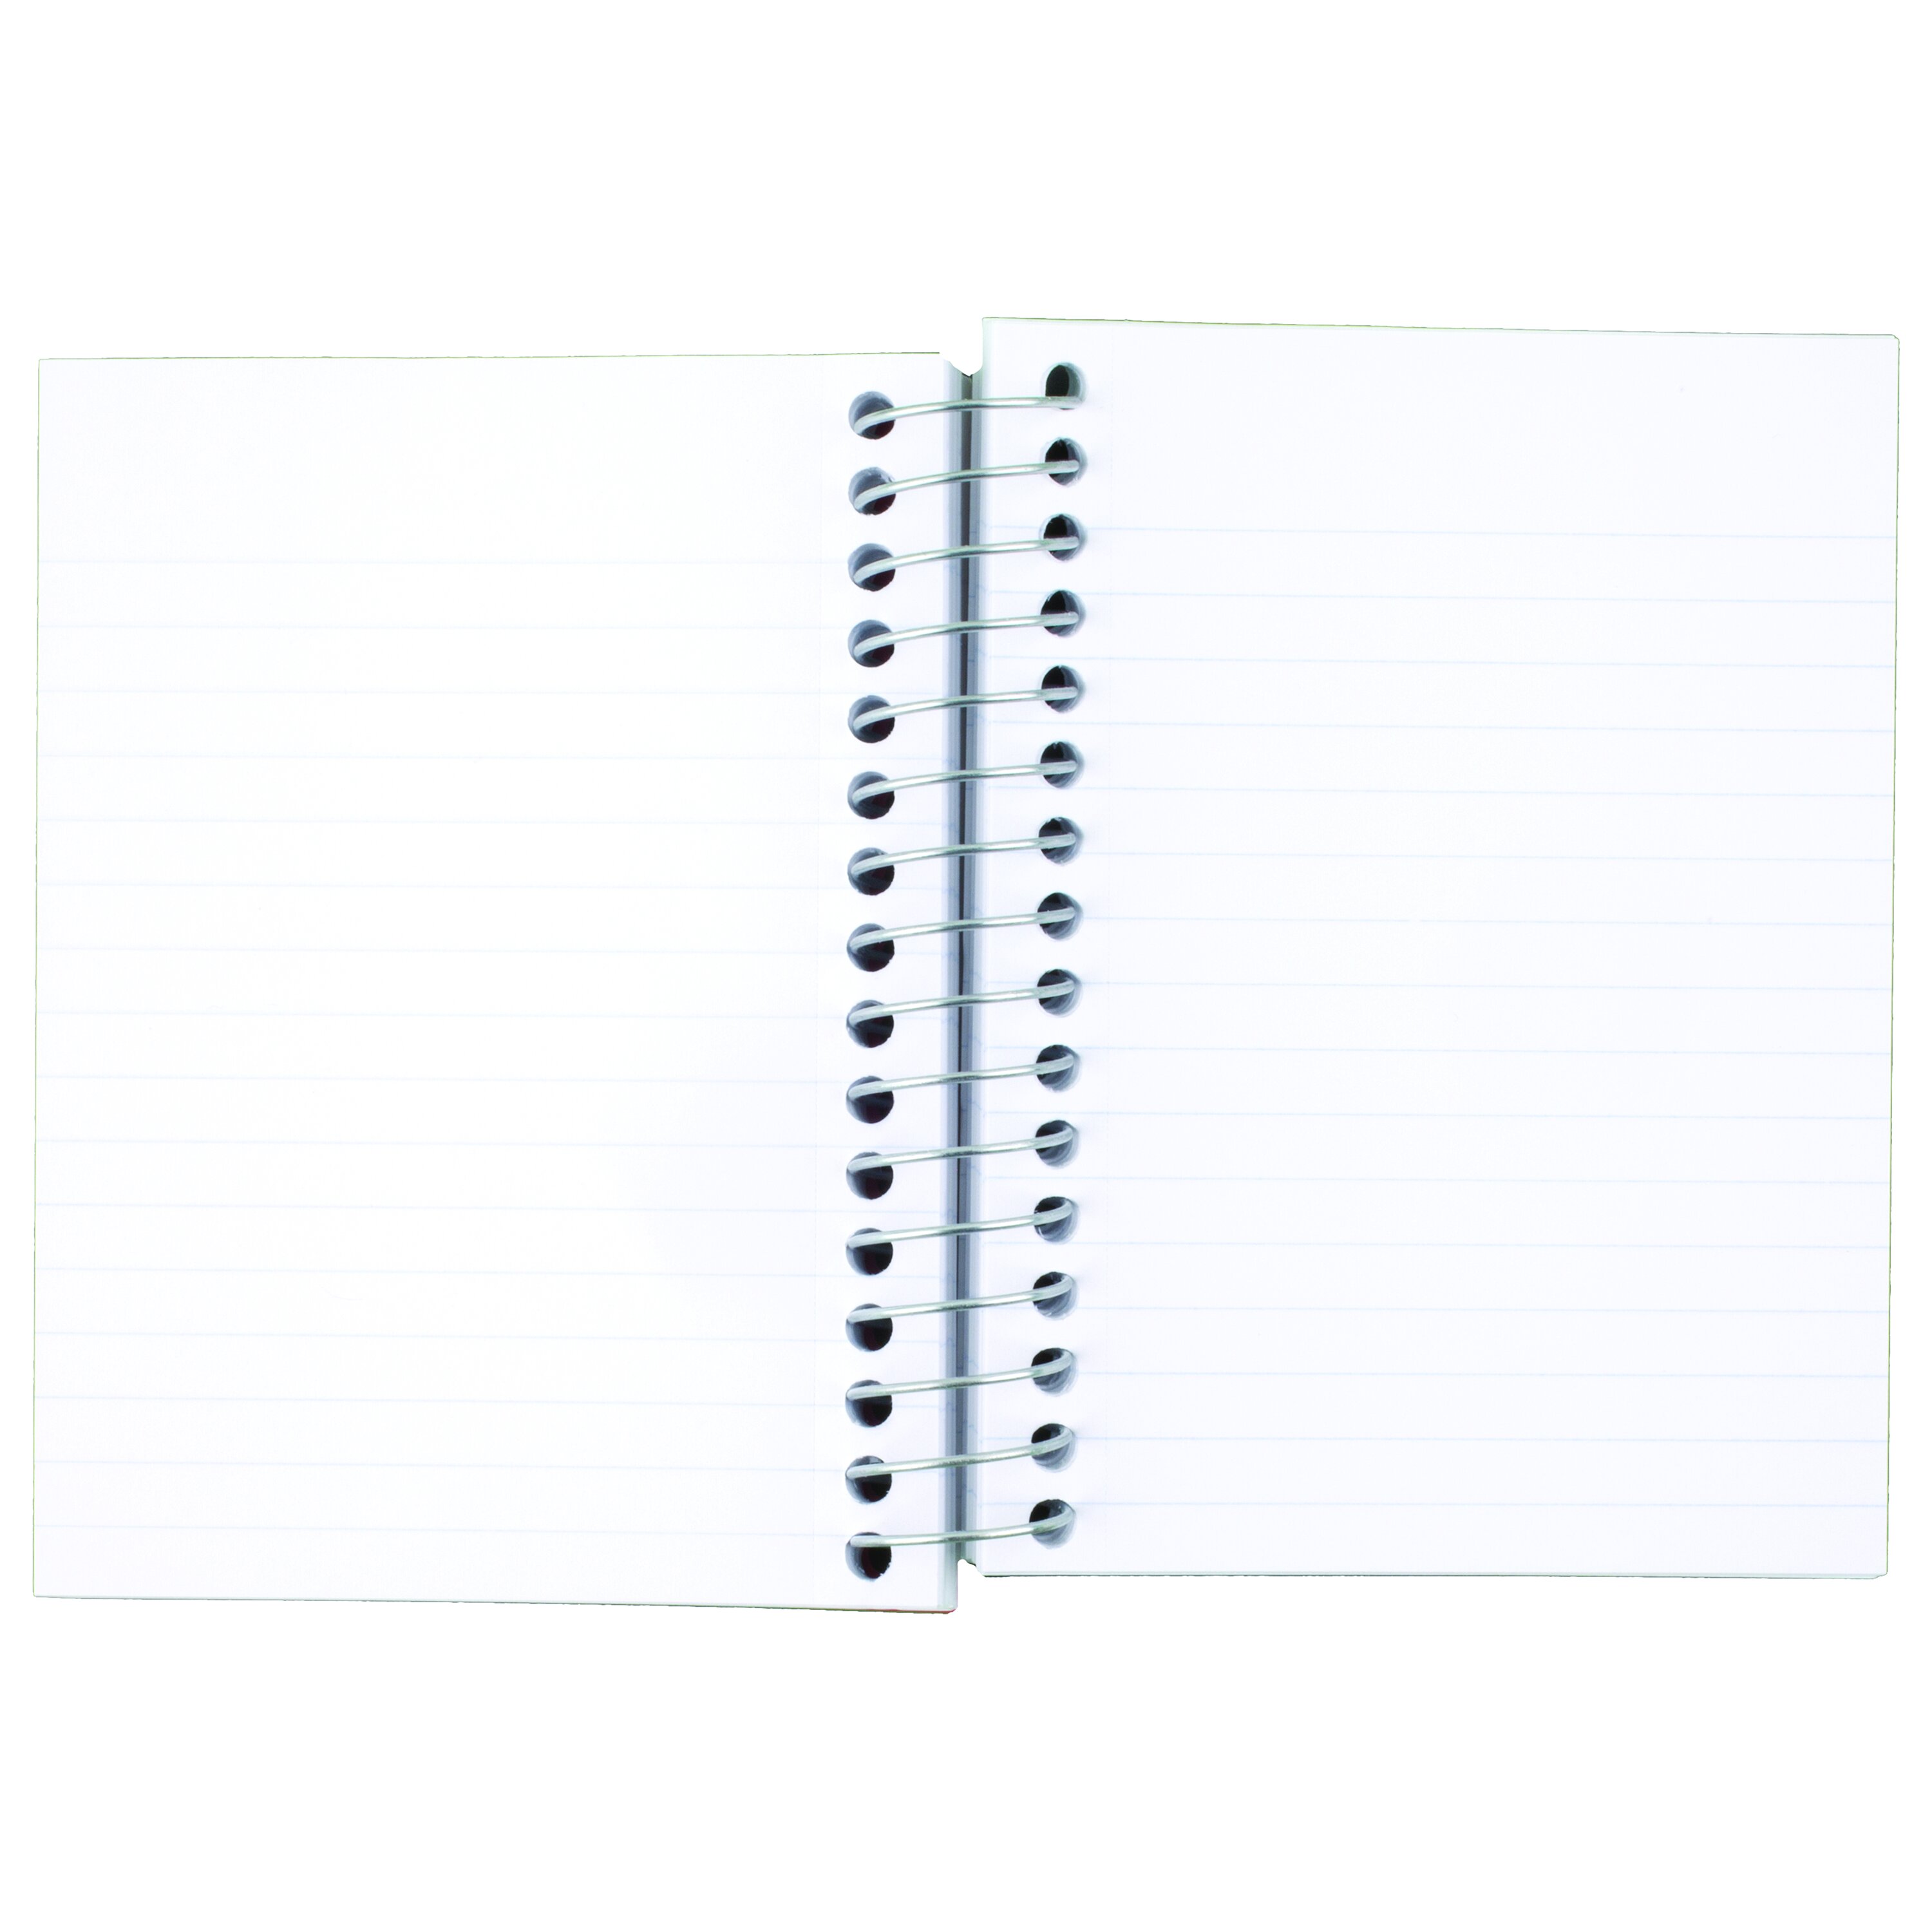 Five Star Fat Lil' College Ruled Wirebound Notebook, 5 1/2" x 4", Color Choice Will Vary (45377) - image 5 of 10